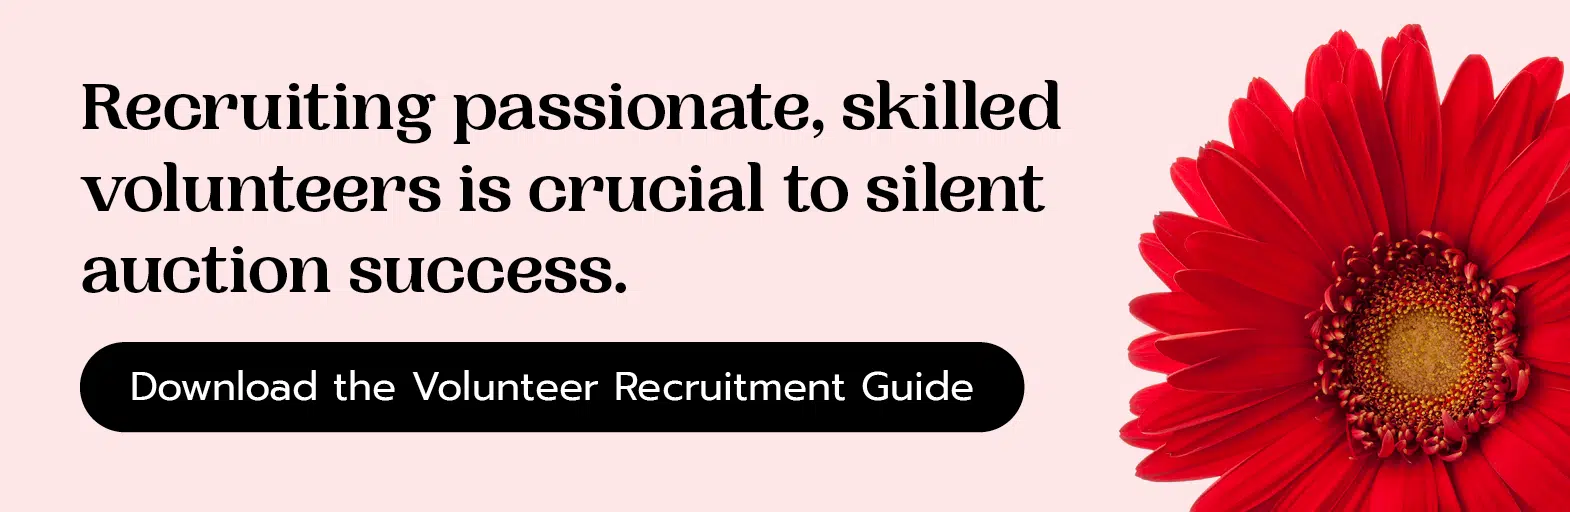 Recruiting passionate, skilled volunteers is crucial to silent auction success. Download the Volunteer Recruitment Guide.